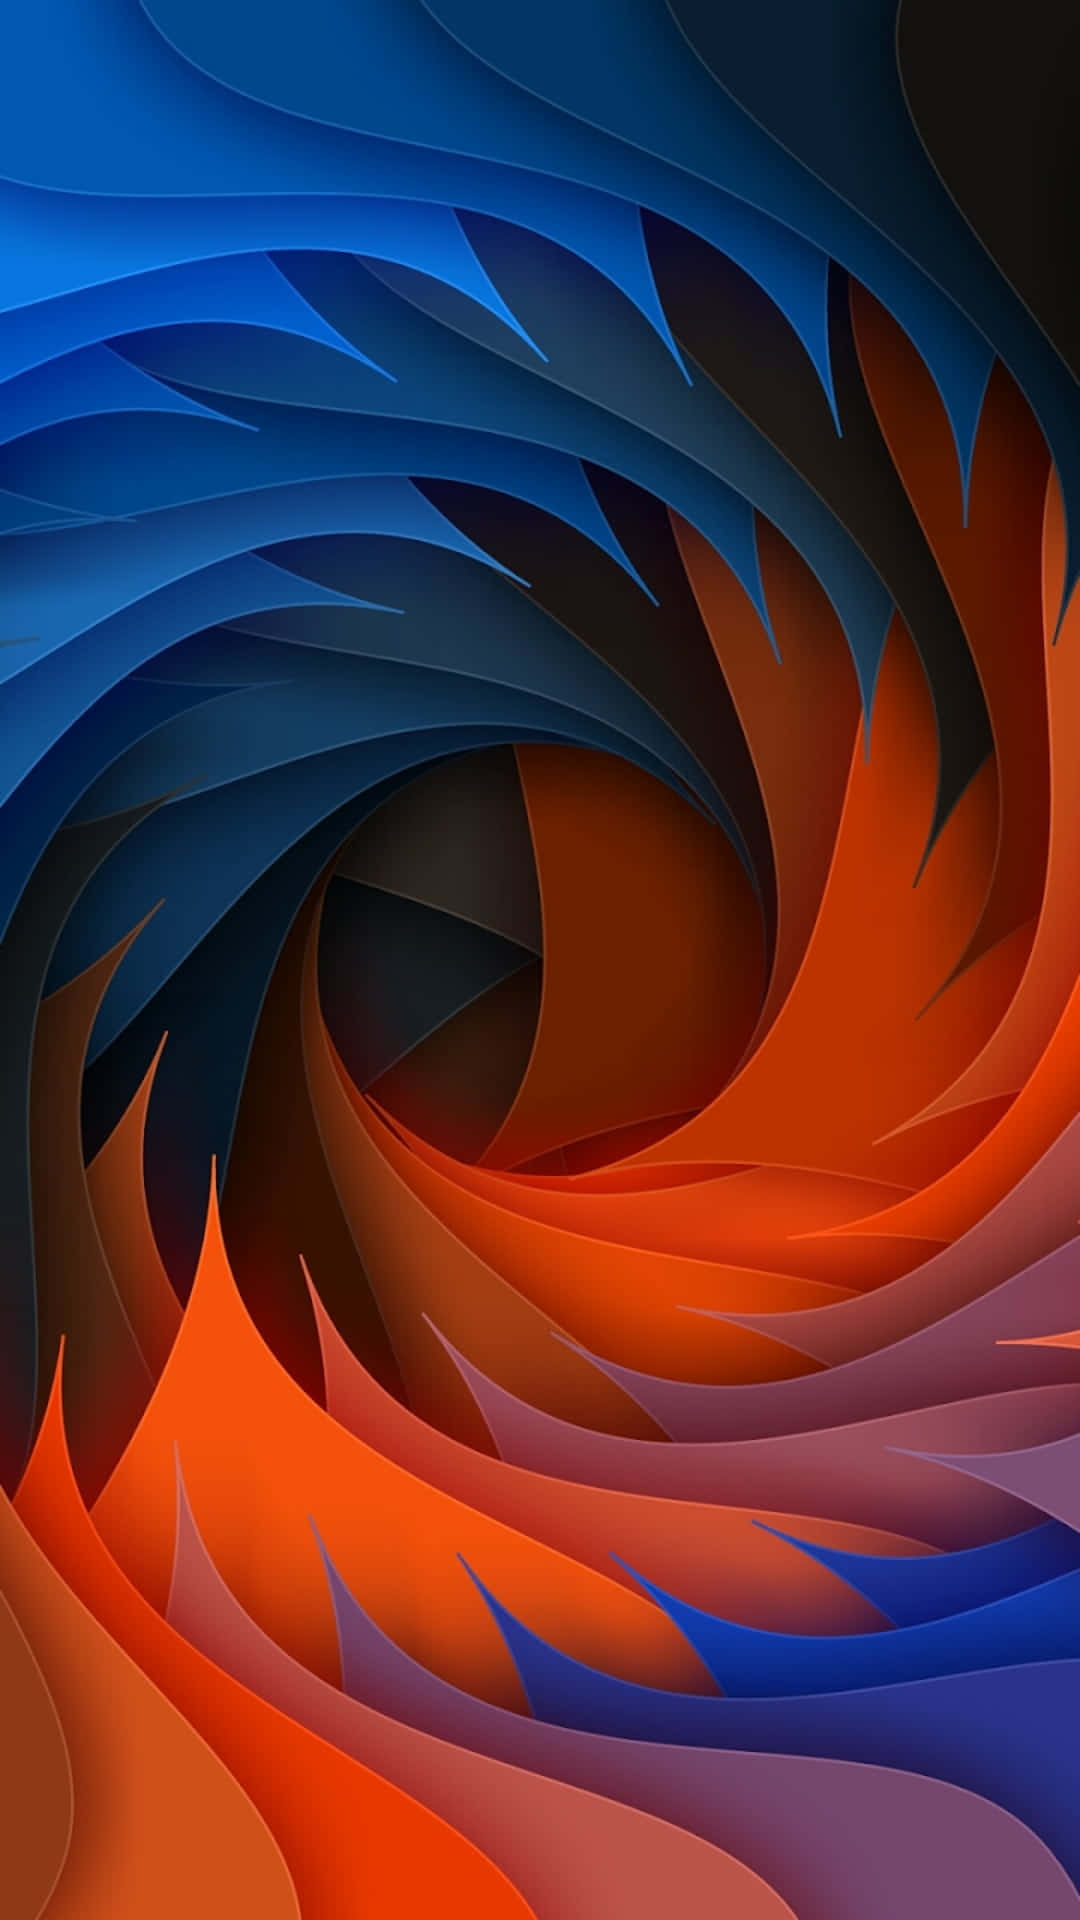 a swirling abstract design with blue, orange and black colors